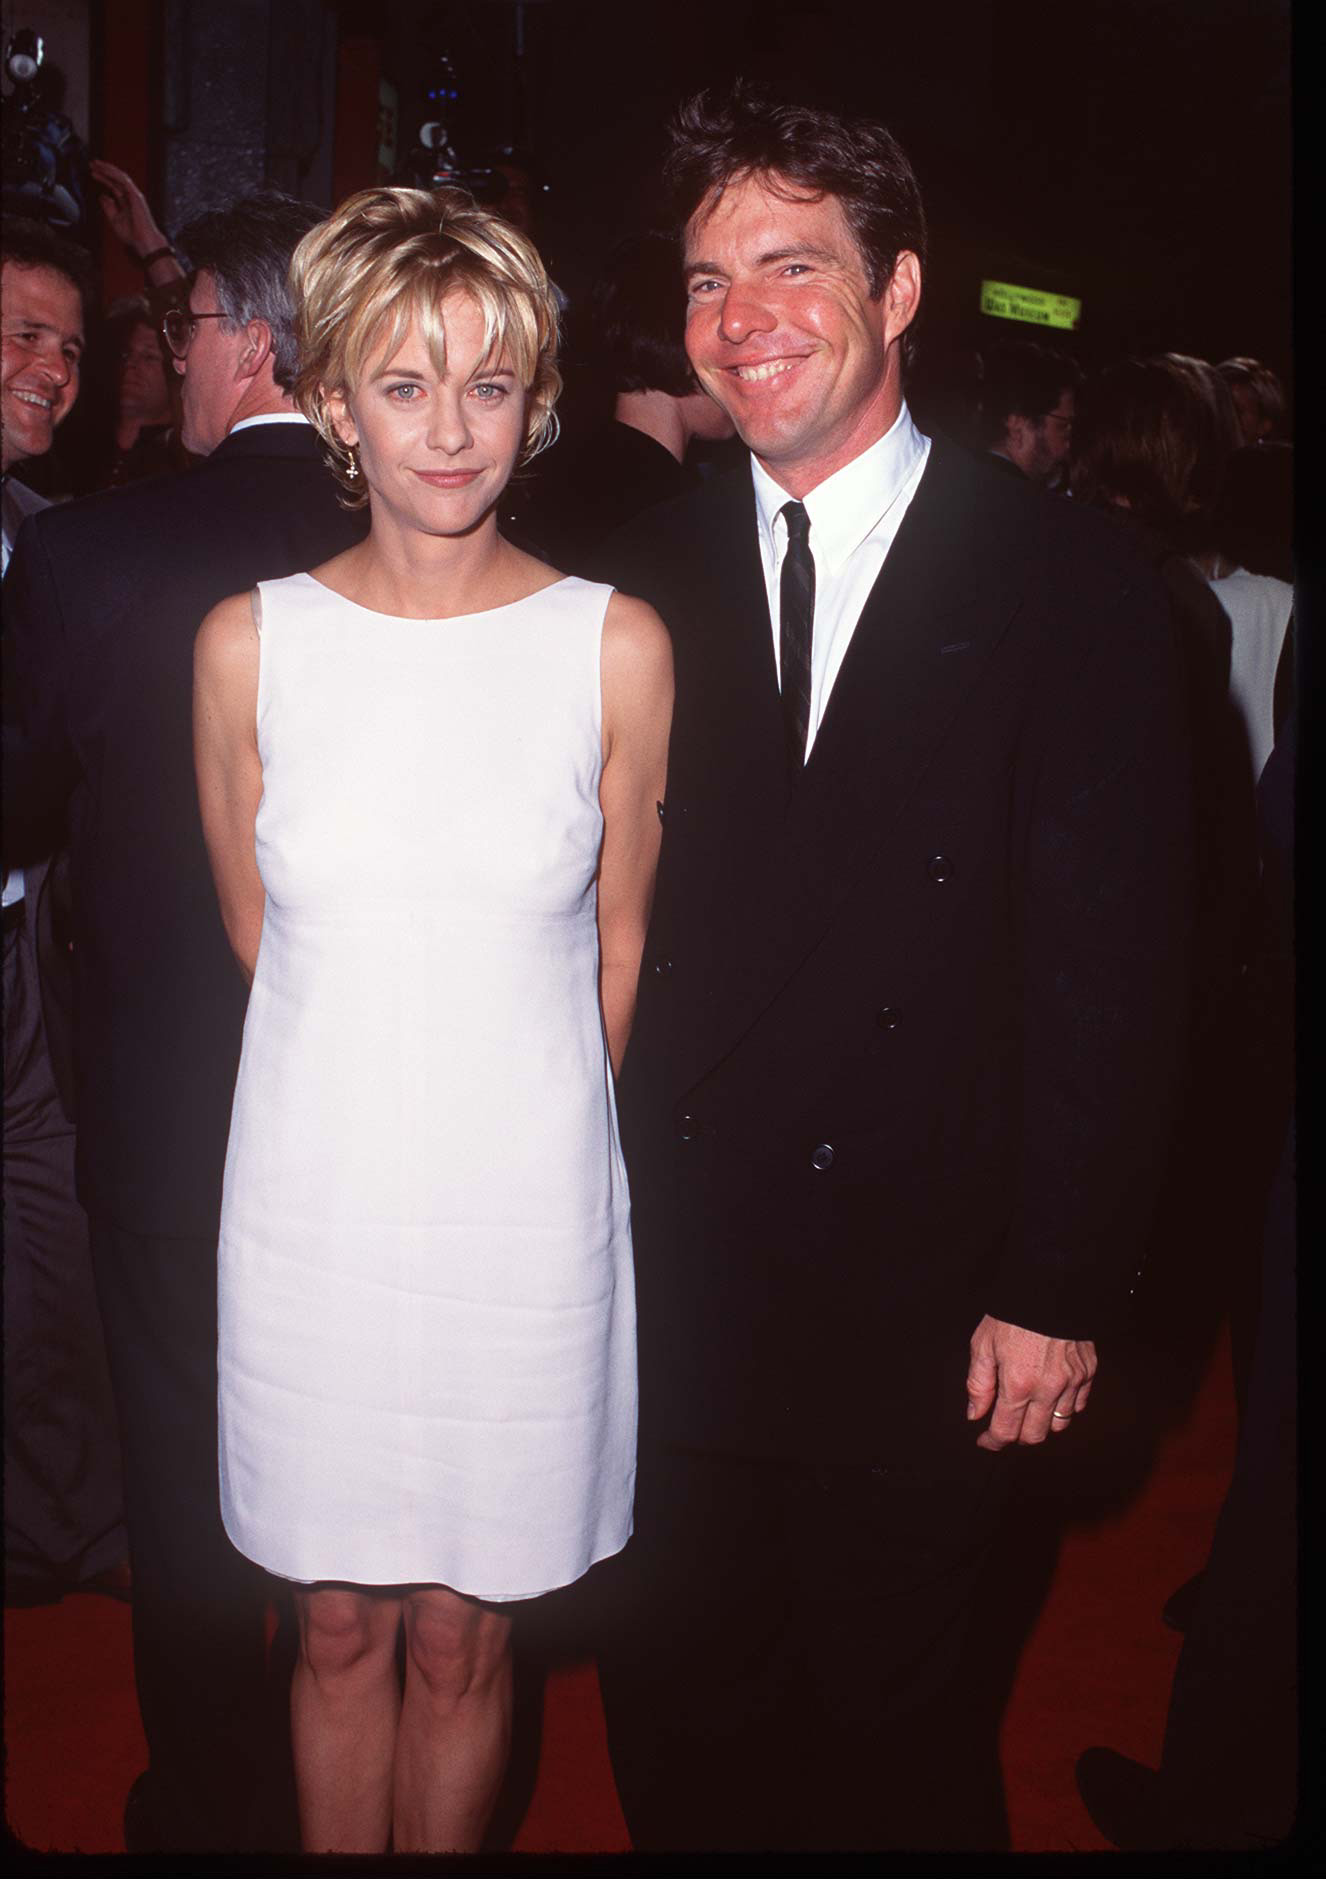 PHOTO: Meg Ryan and Dennis Quaid attend  the "French Kiss" Los Angeles premiere in this  May 1, 1995 file photo.